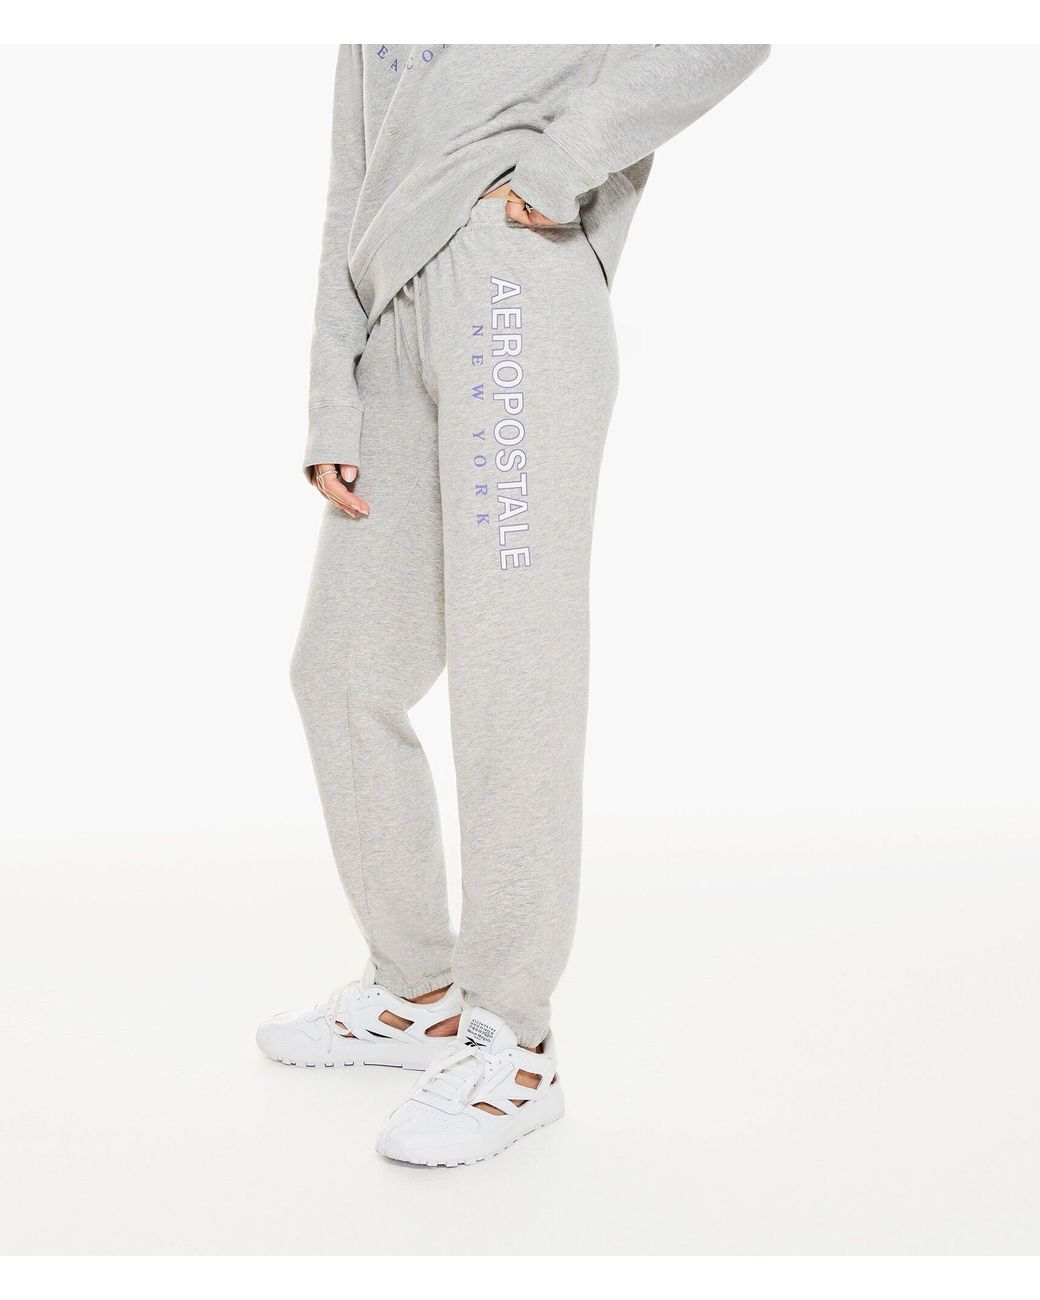 Aéropostale Logo Cinched Sweatpants in White